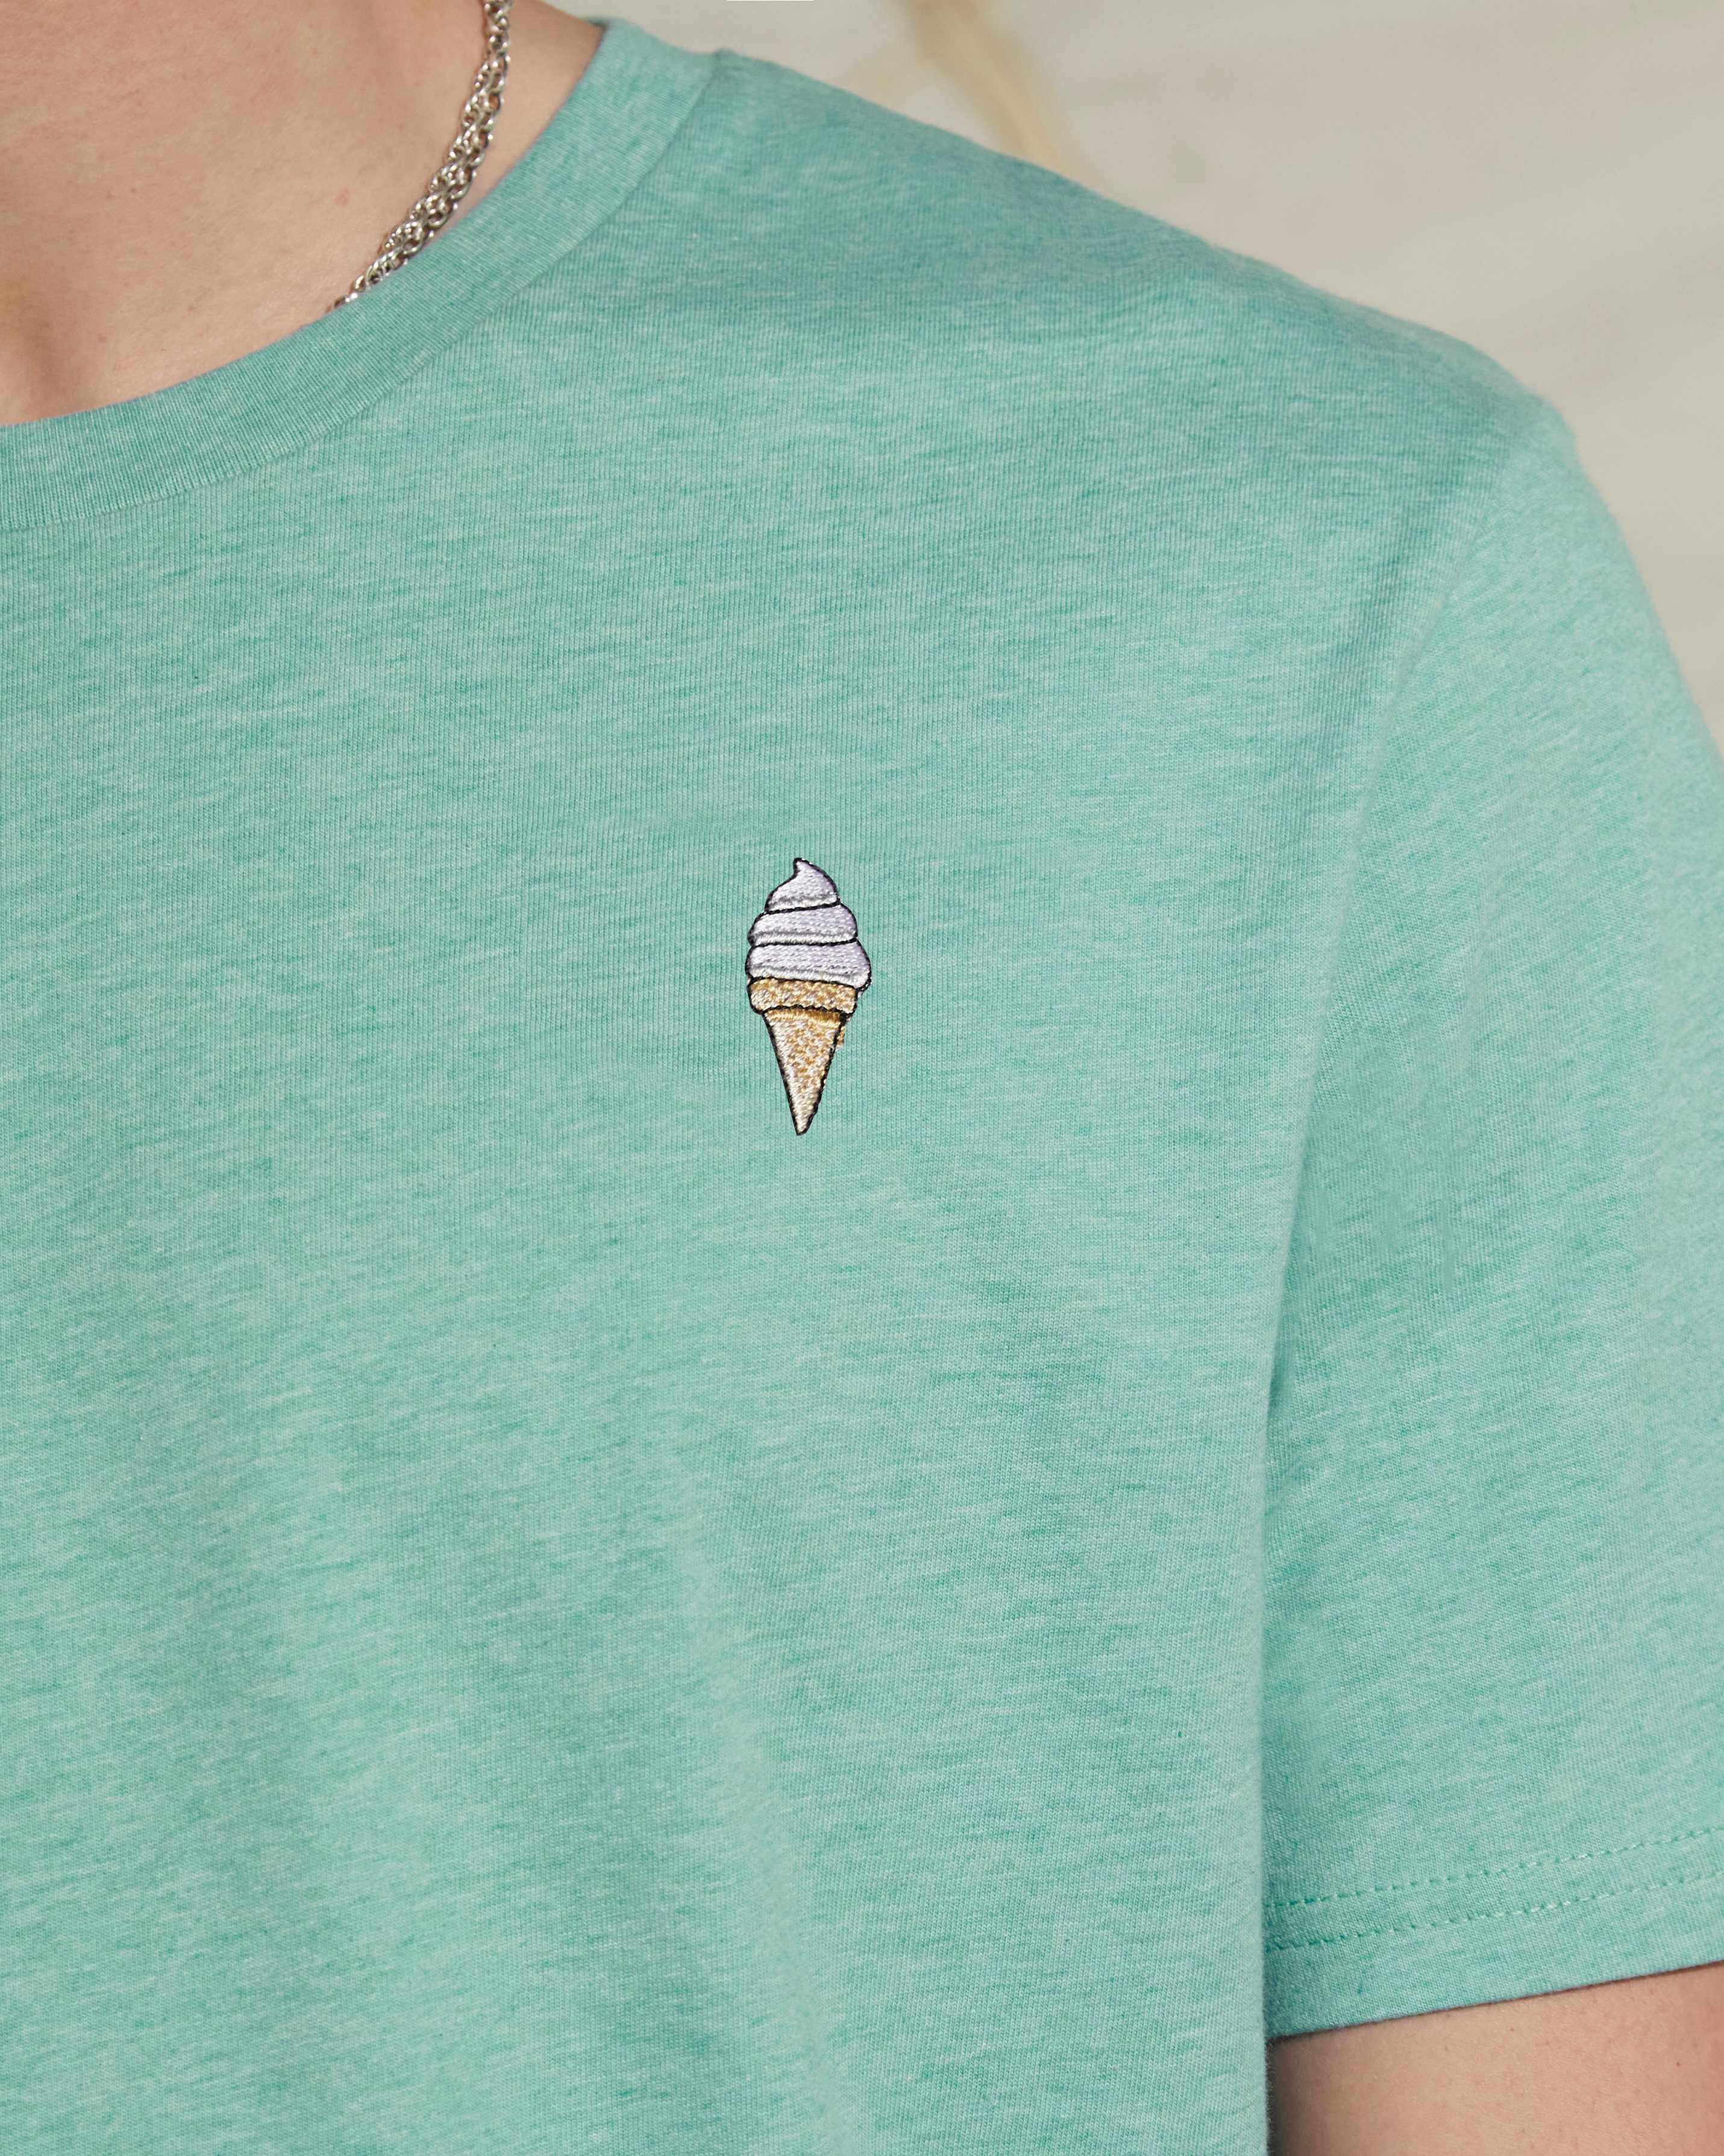 Ice cream embroidery on a green t-shirt 